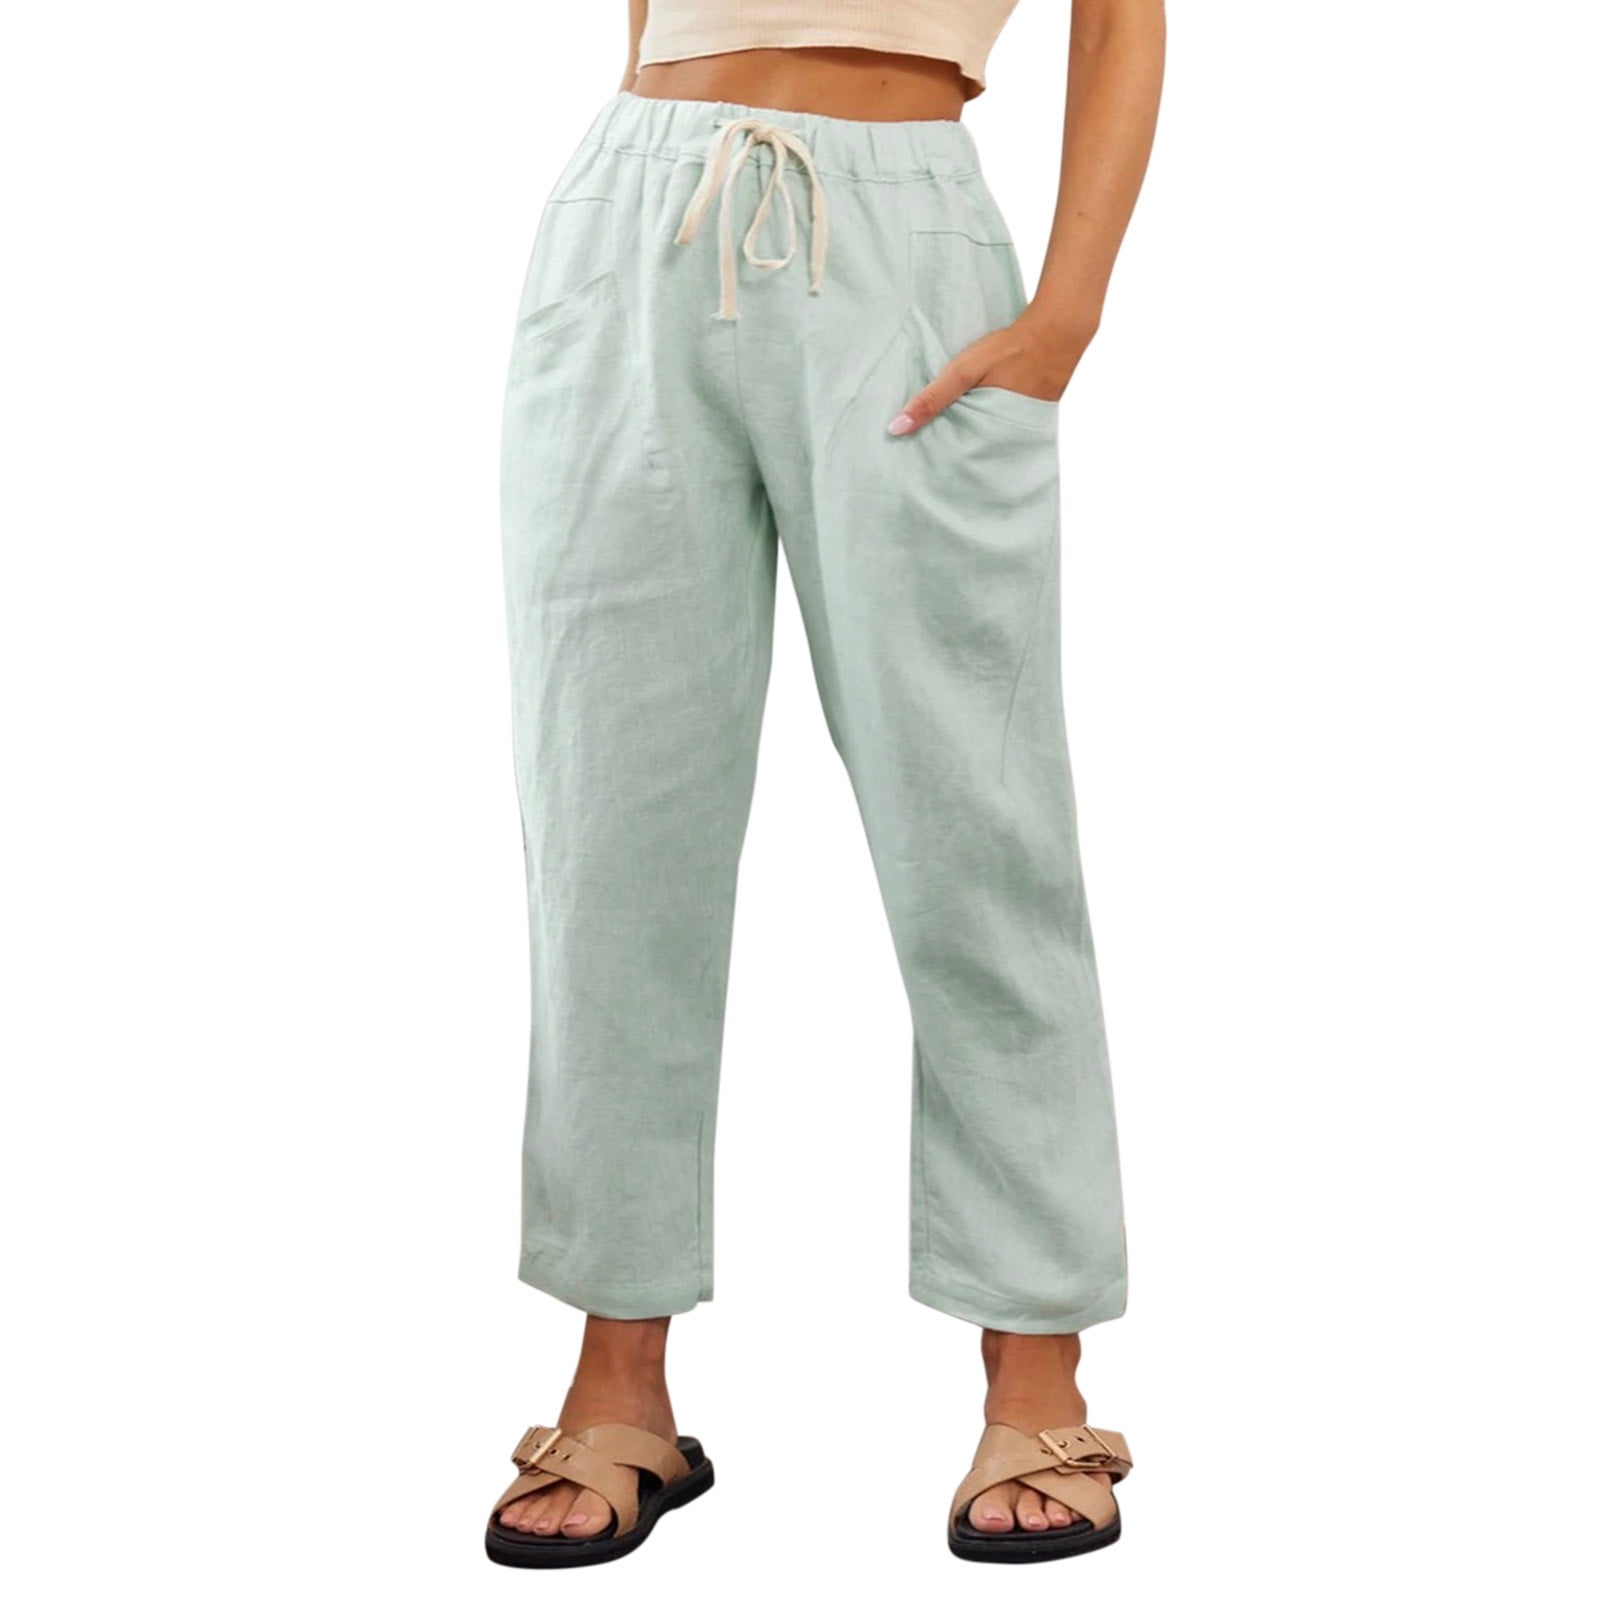 xinqinghao sweat pants women cotton linen long lounge pants high waist  drawstring loose fit casual trousers with pockets stretch pants light blue  s 